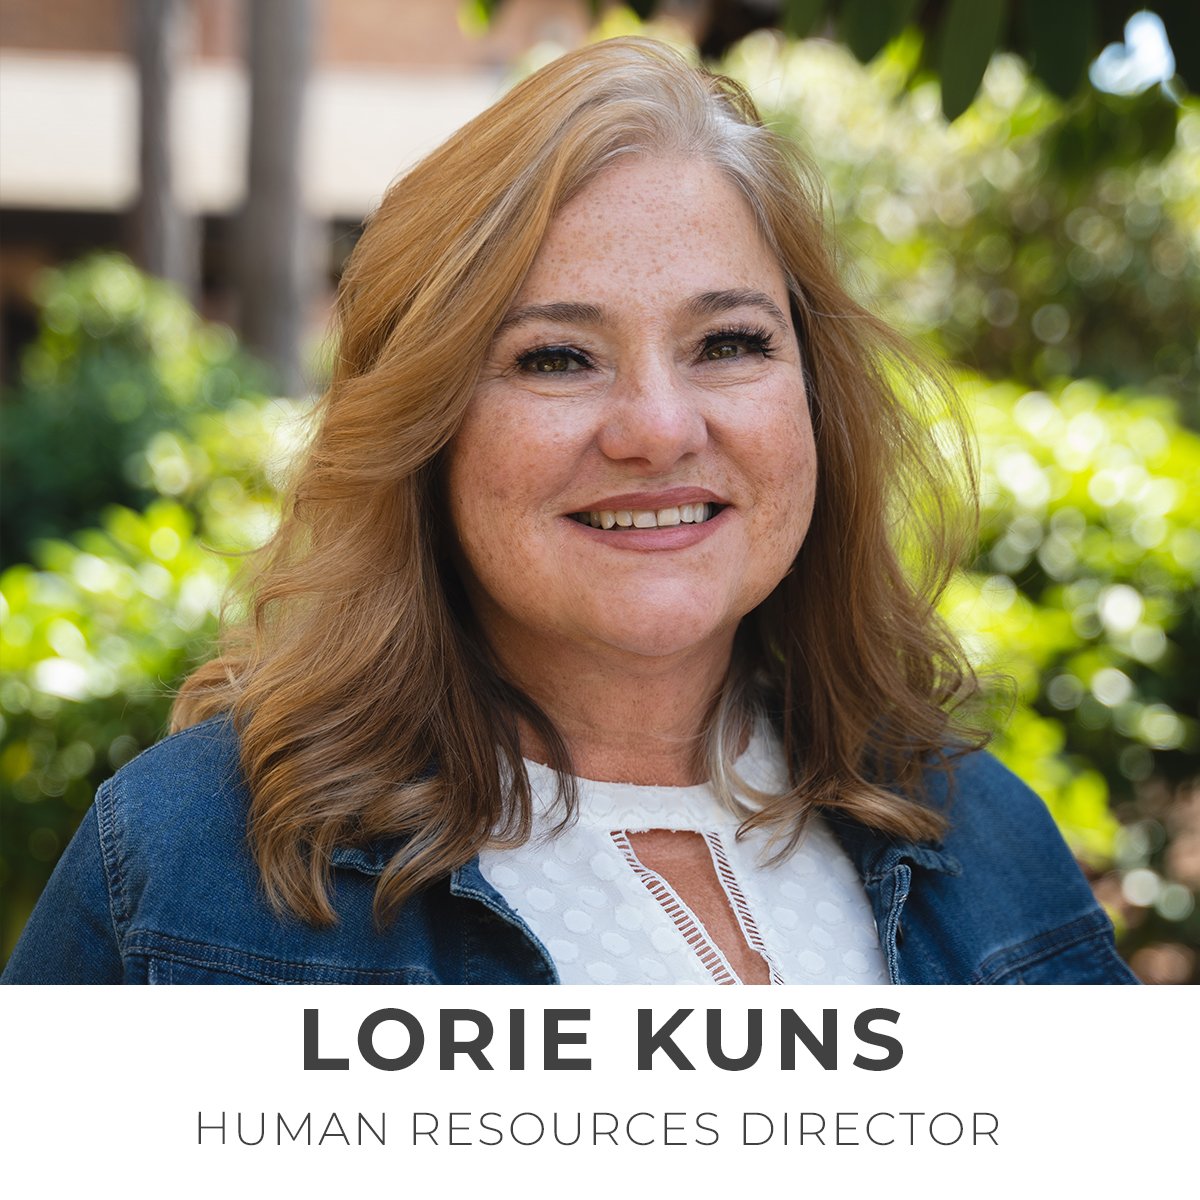 Lorie Kuns, Human Resources Director